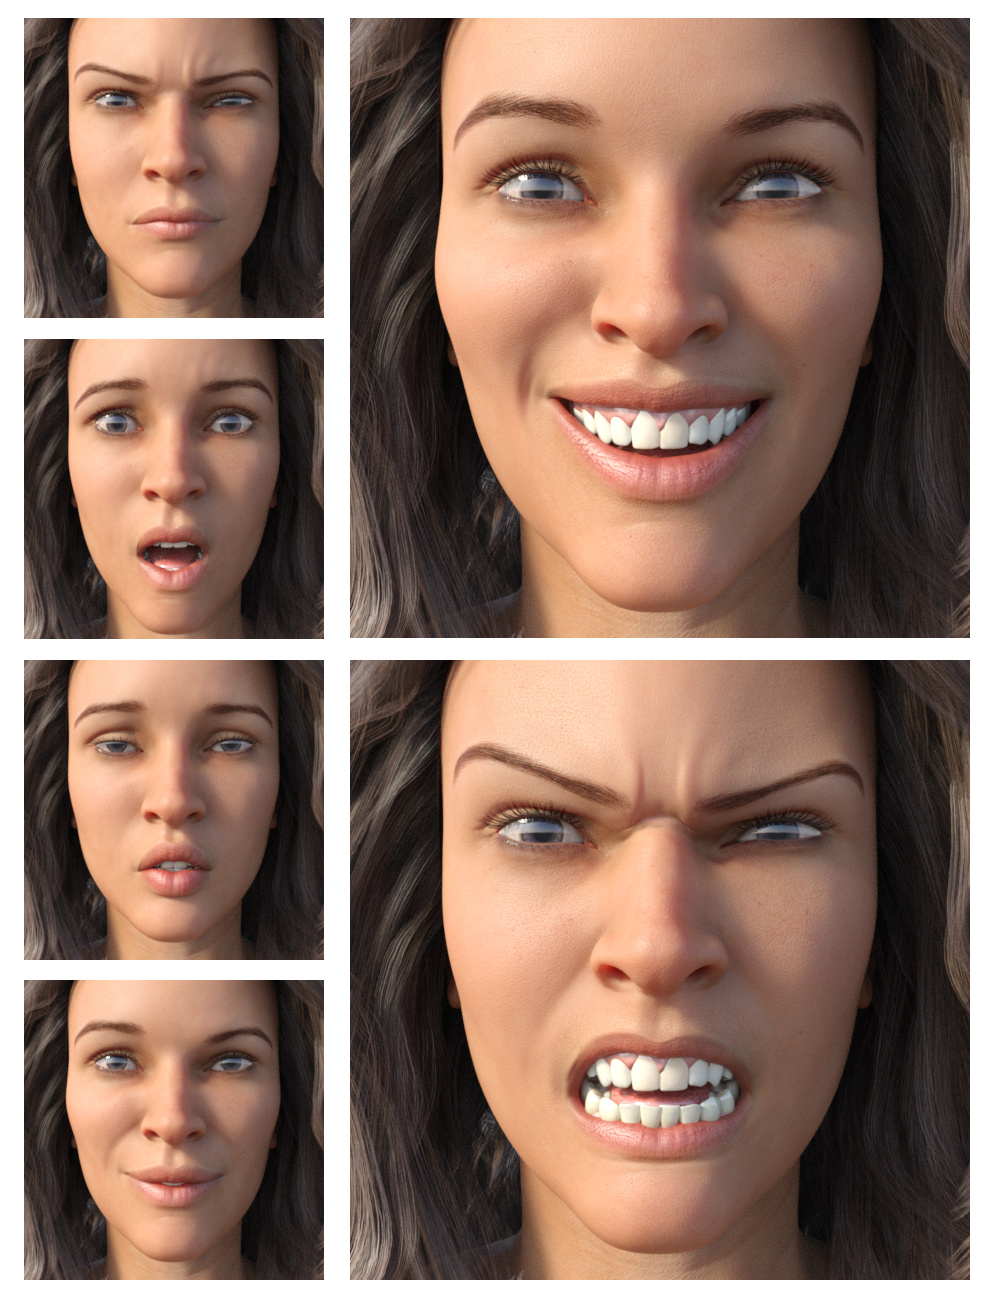 ACTION STAR Expressions for Gia 8 by: Sharktooth, 3D Models by Daz 3D